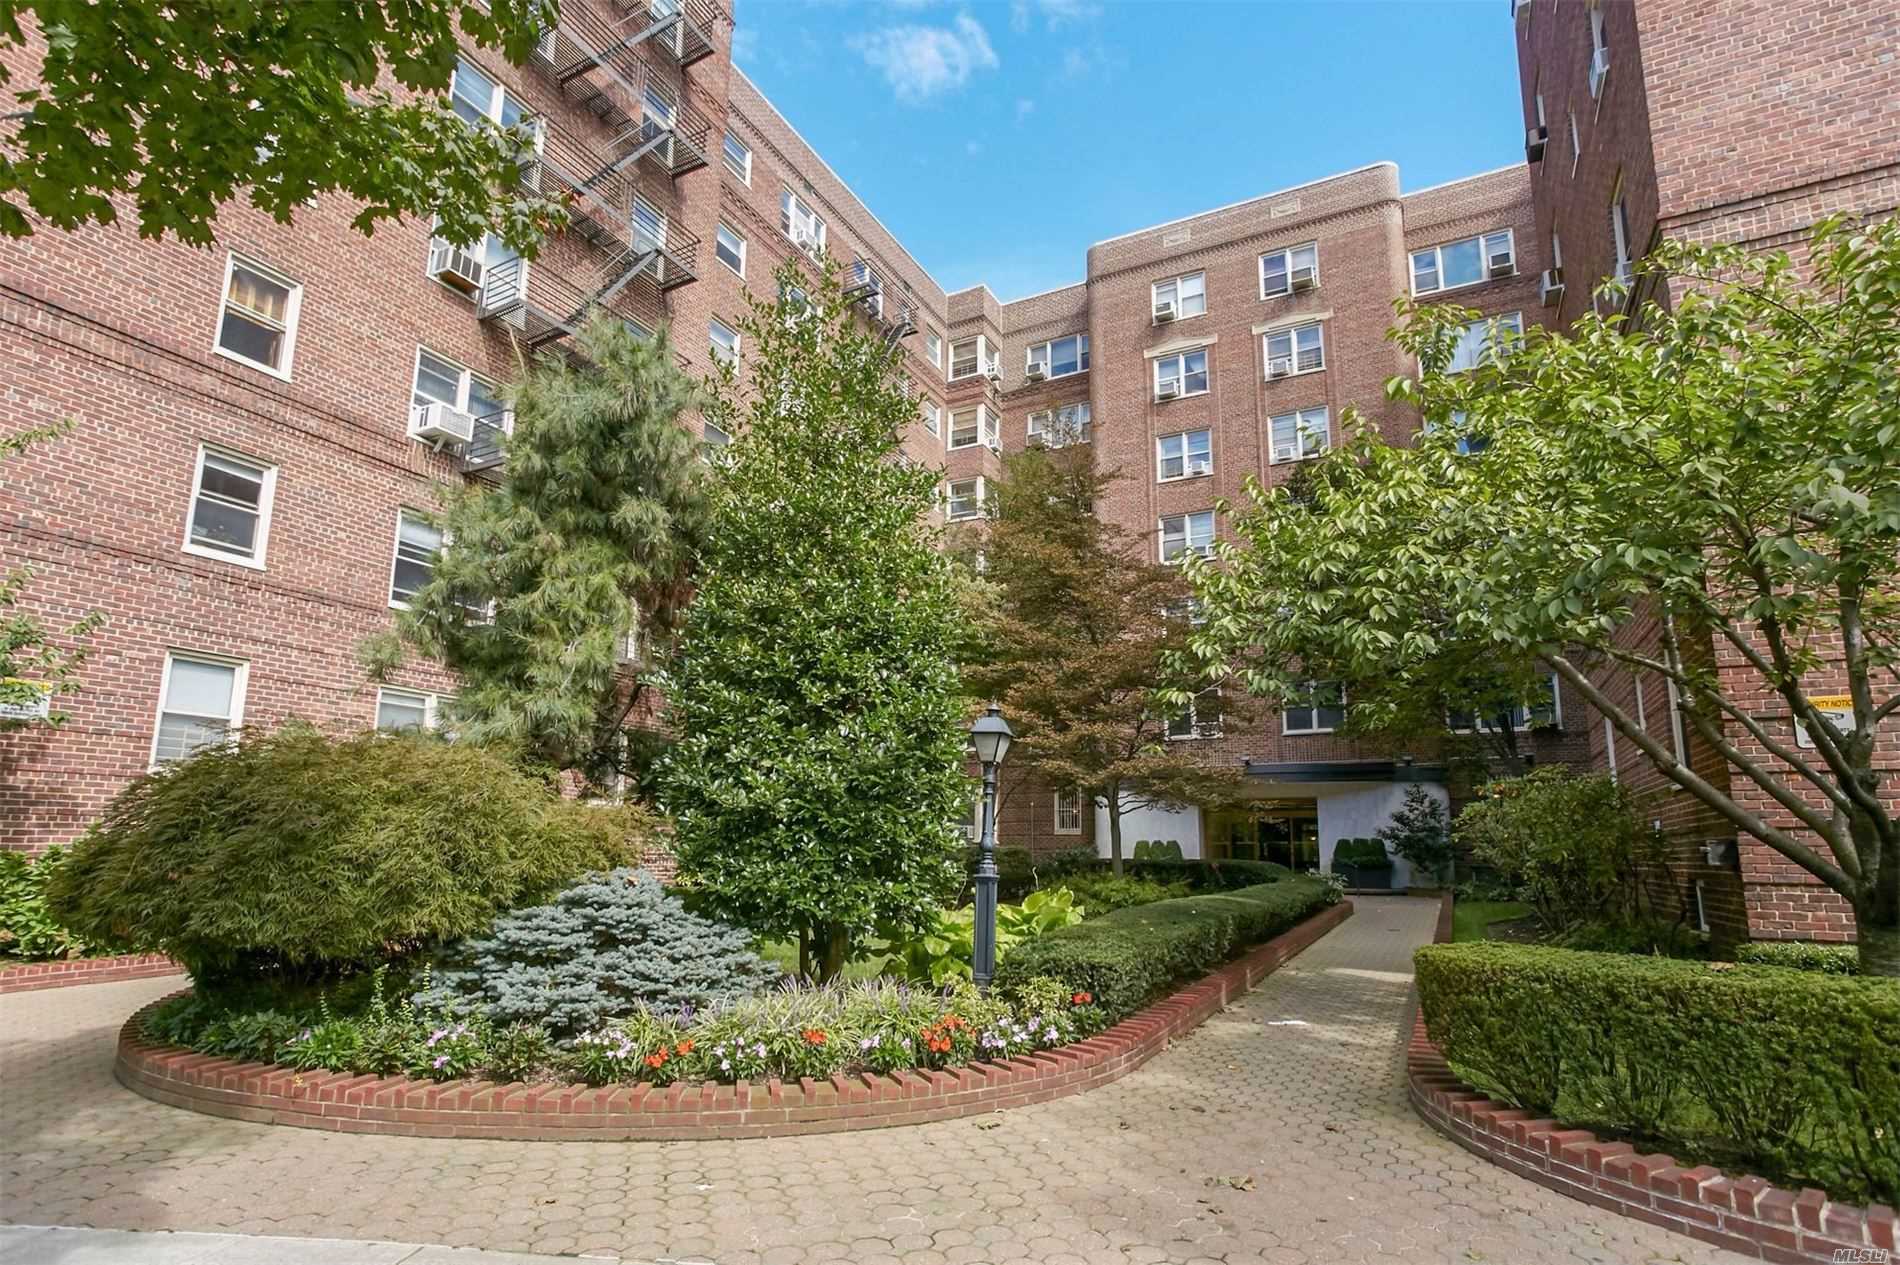 Rarely available full 3 bedroom 2 bath unit with terrace. Tremendous space! Needs work. Great doorman building. Short walk to Continental E &F subway trains, and M & R local. Q23, & Q60 bus.